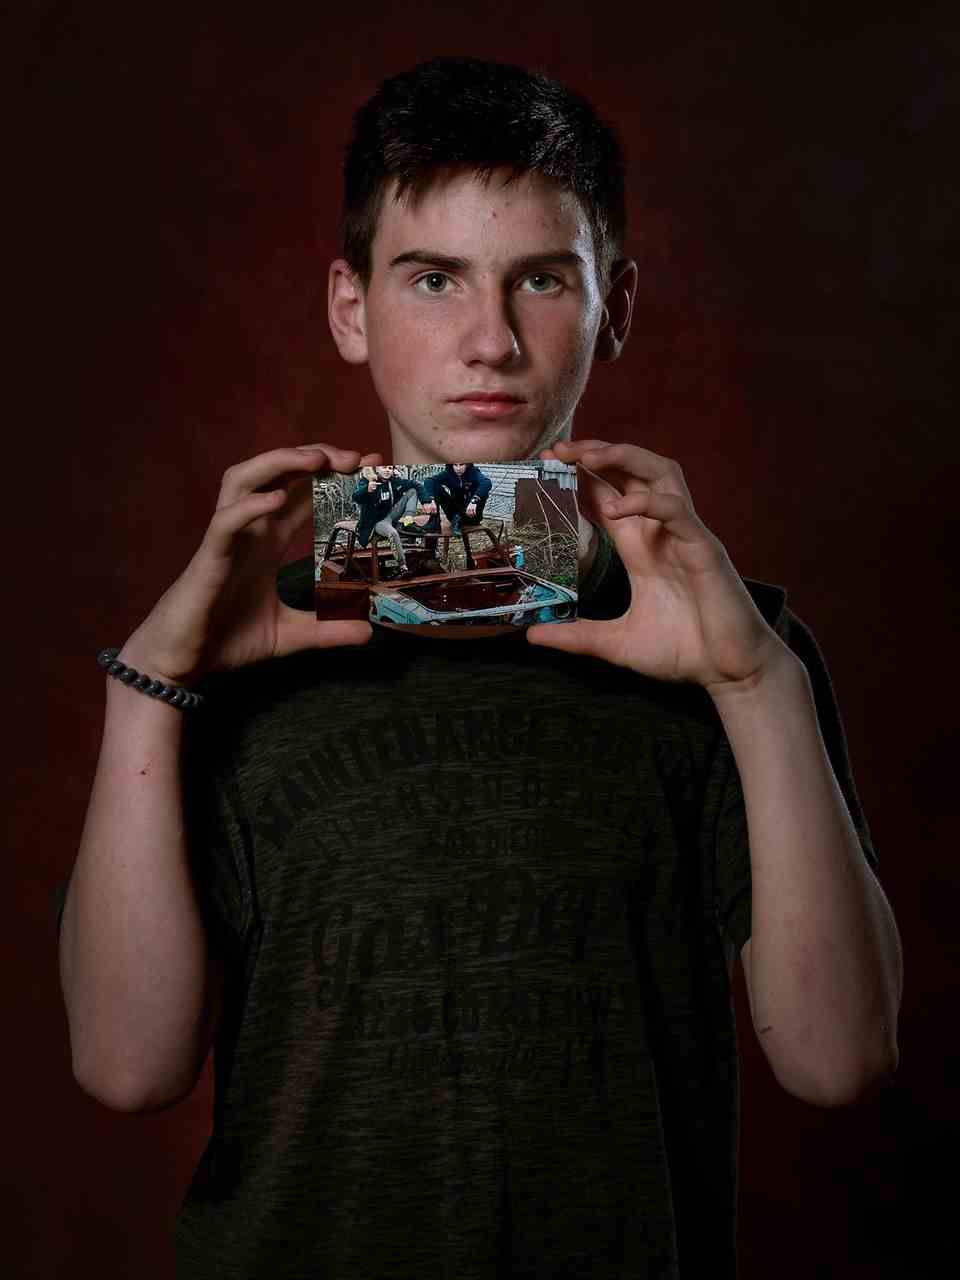 Maxim, from Ukraine, holds a photo print in his hand